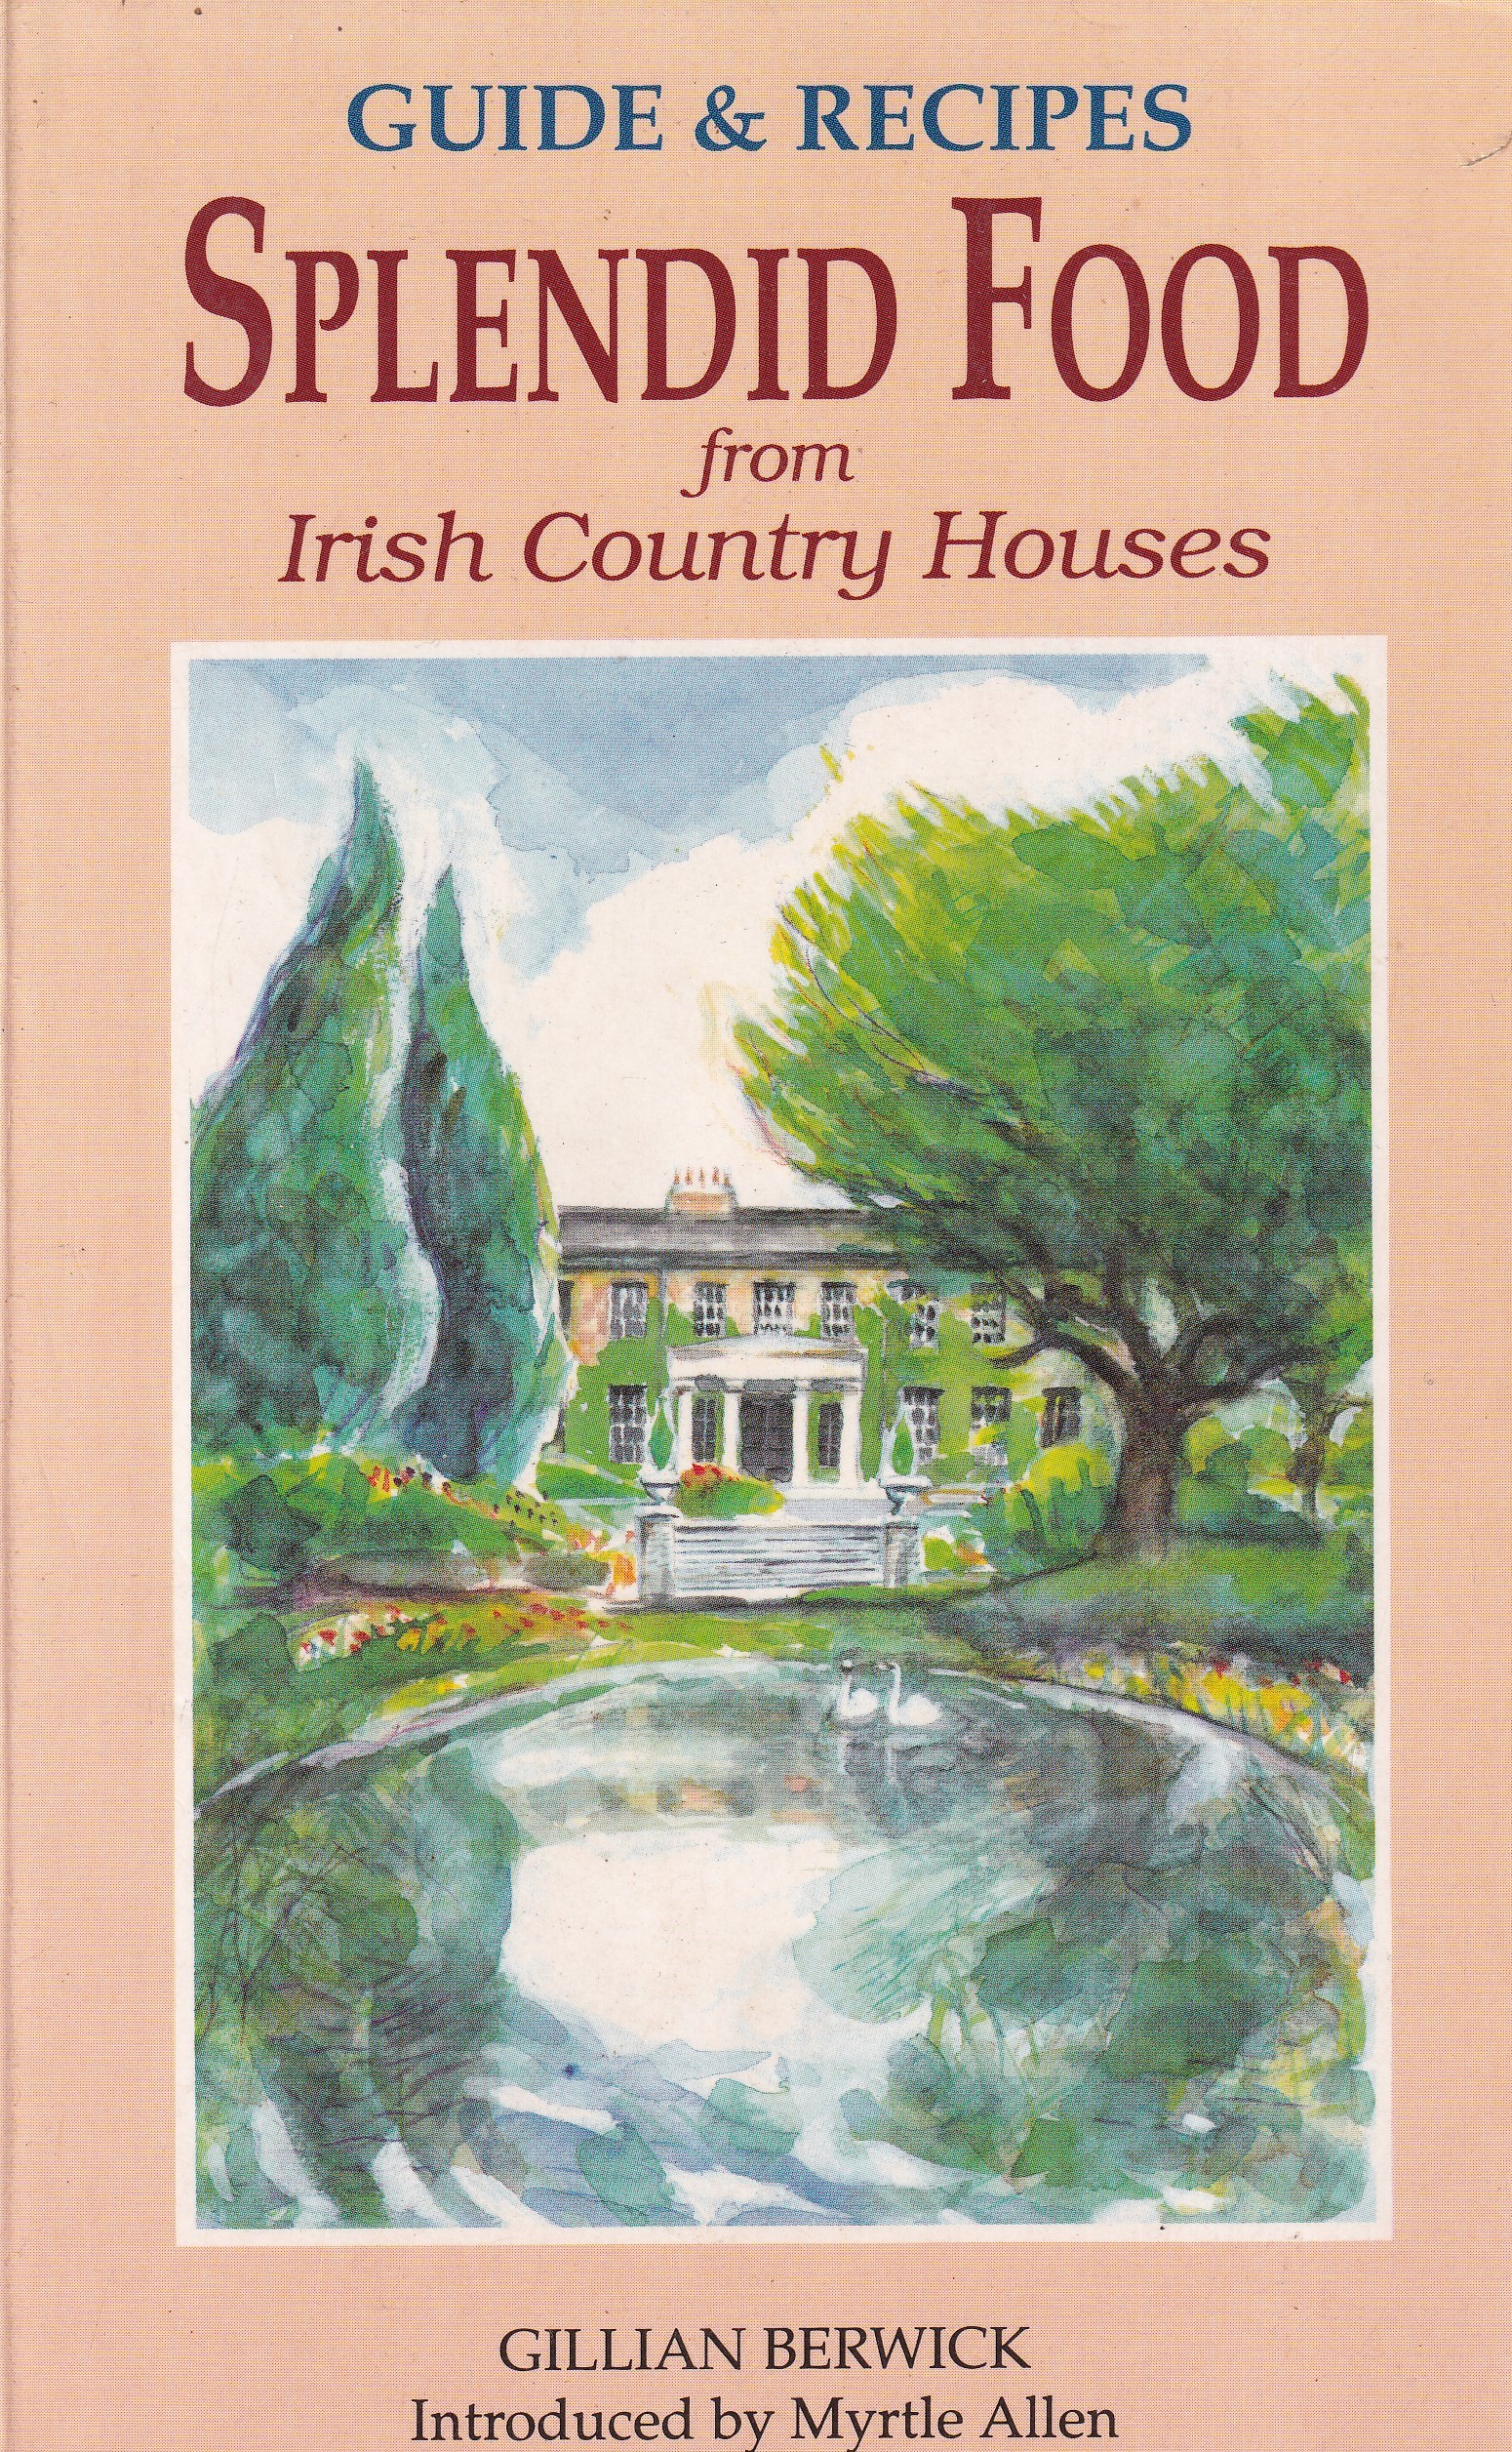 Splendid Food from Irish Country Houses: Guides and Recipes by Gillian Berwick